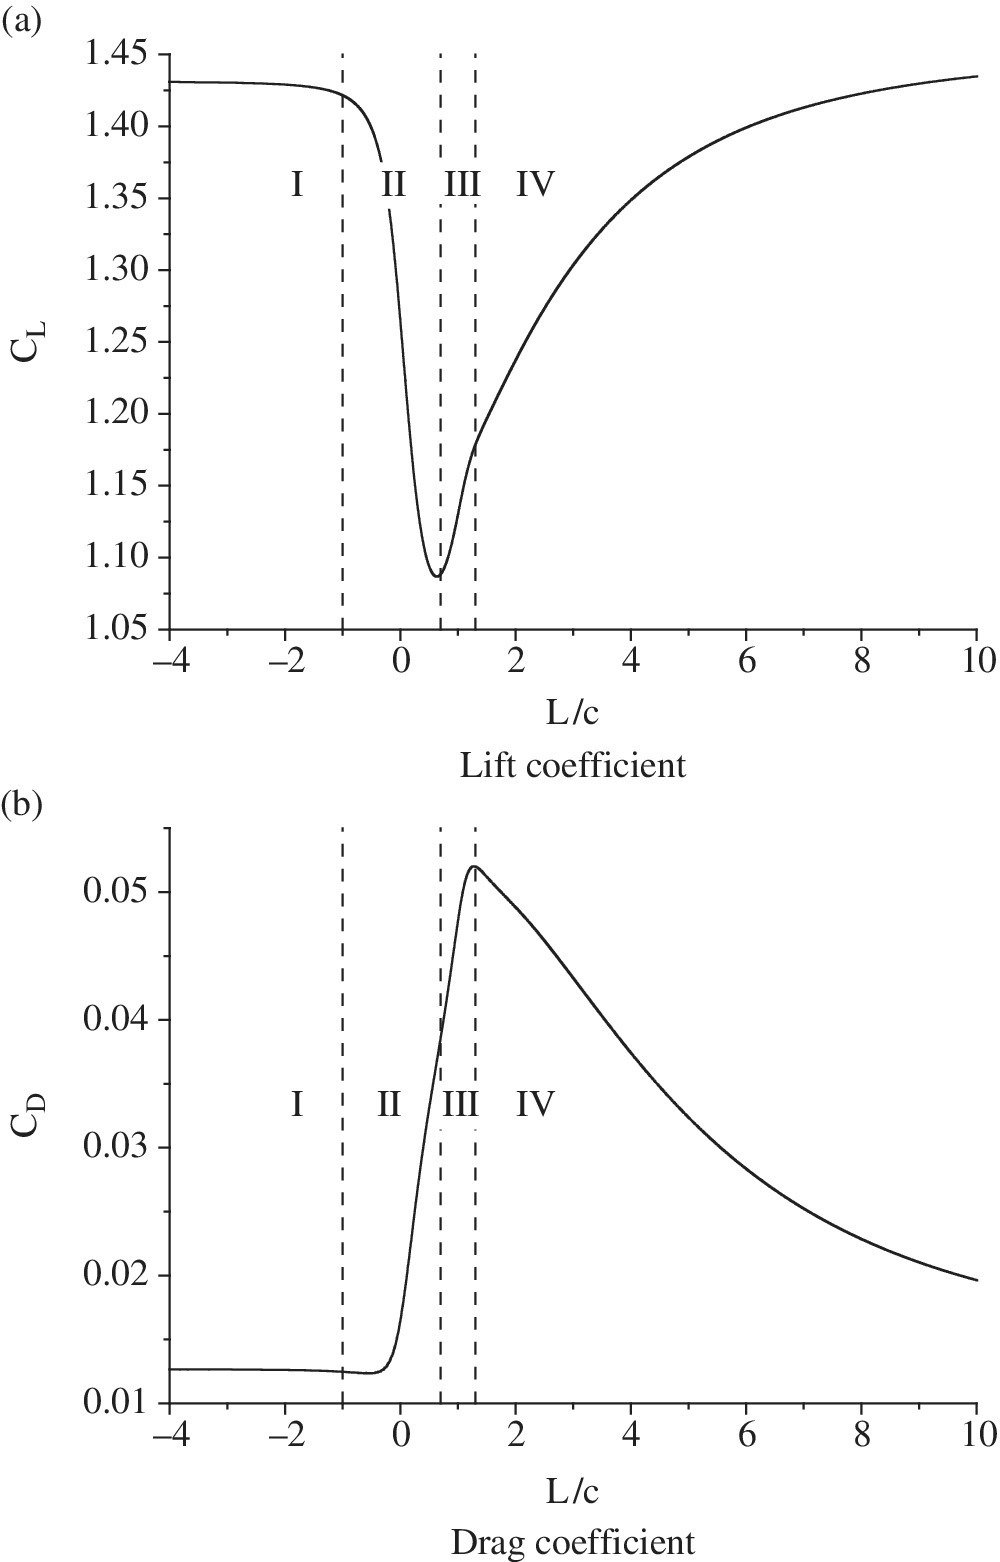 Two graphs illustrating the aerodynamic force history curves of NACA4412 during a typical take‐off process with three dashed vertical lines for I, II, III, and IV.